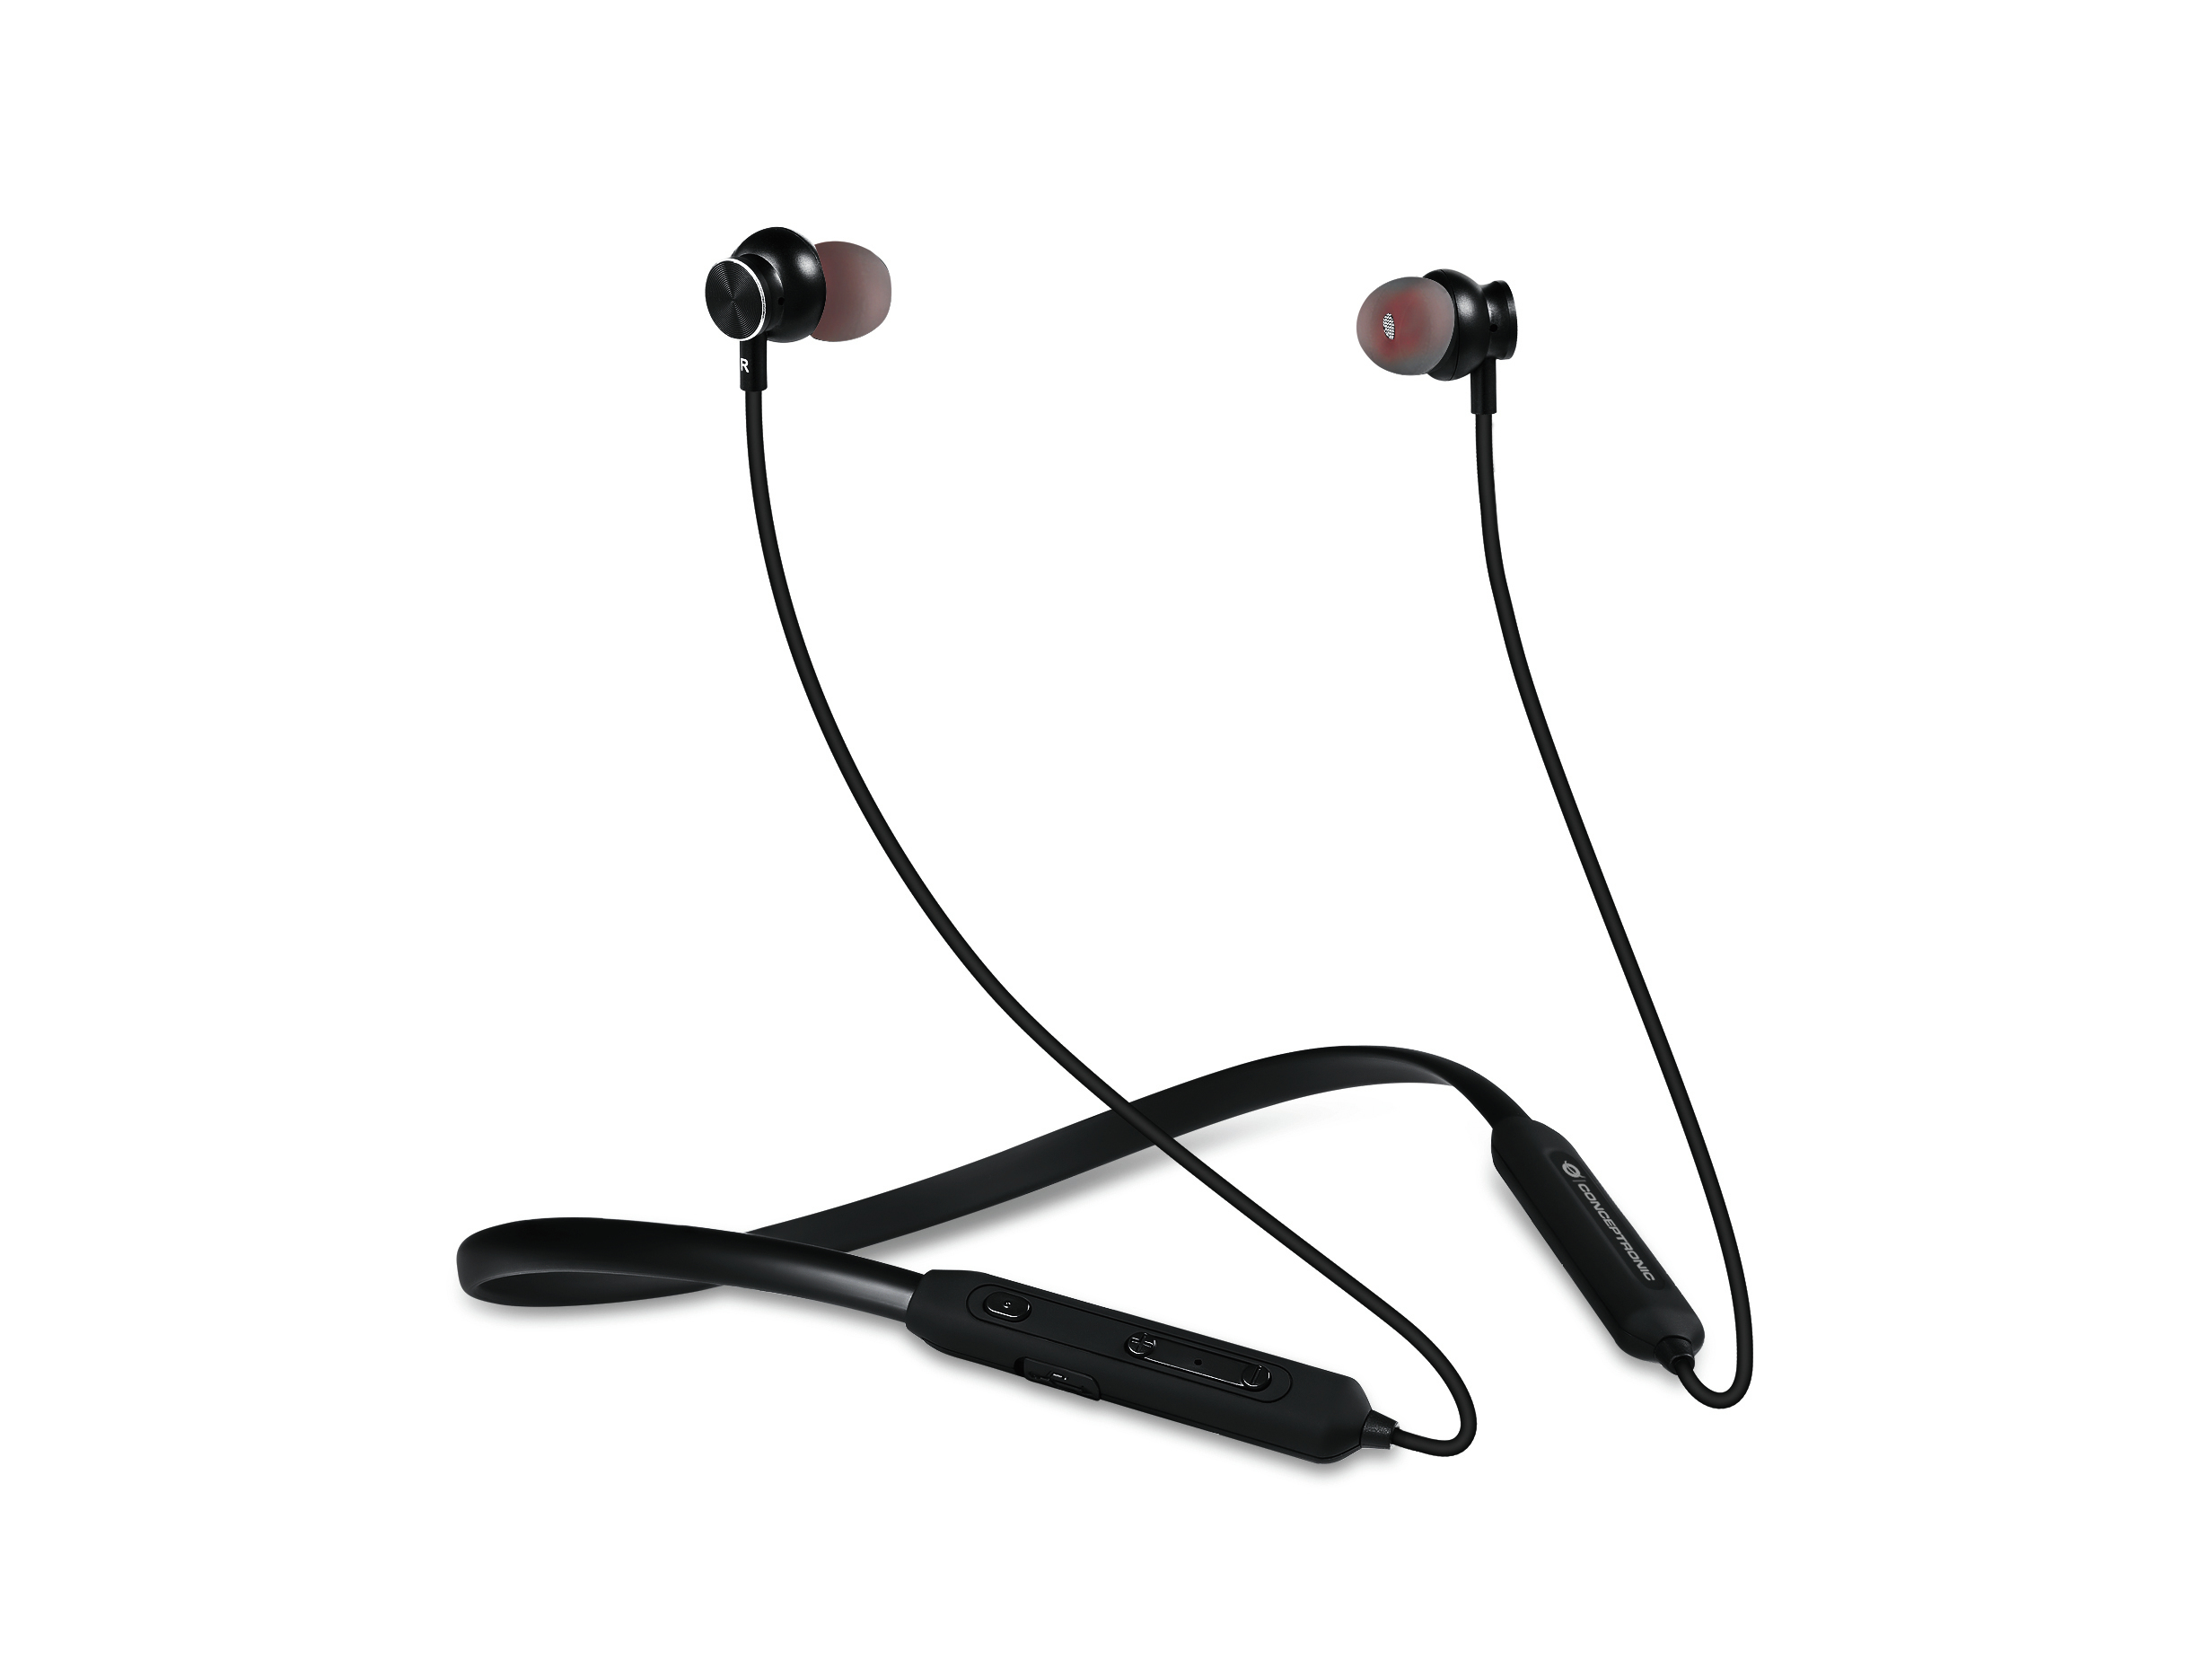 CONCEPTRONIC Bluetooth Kabellose In-Ear-Kophöhrer sw